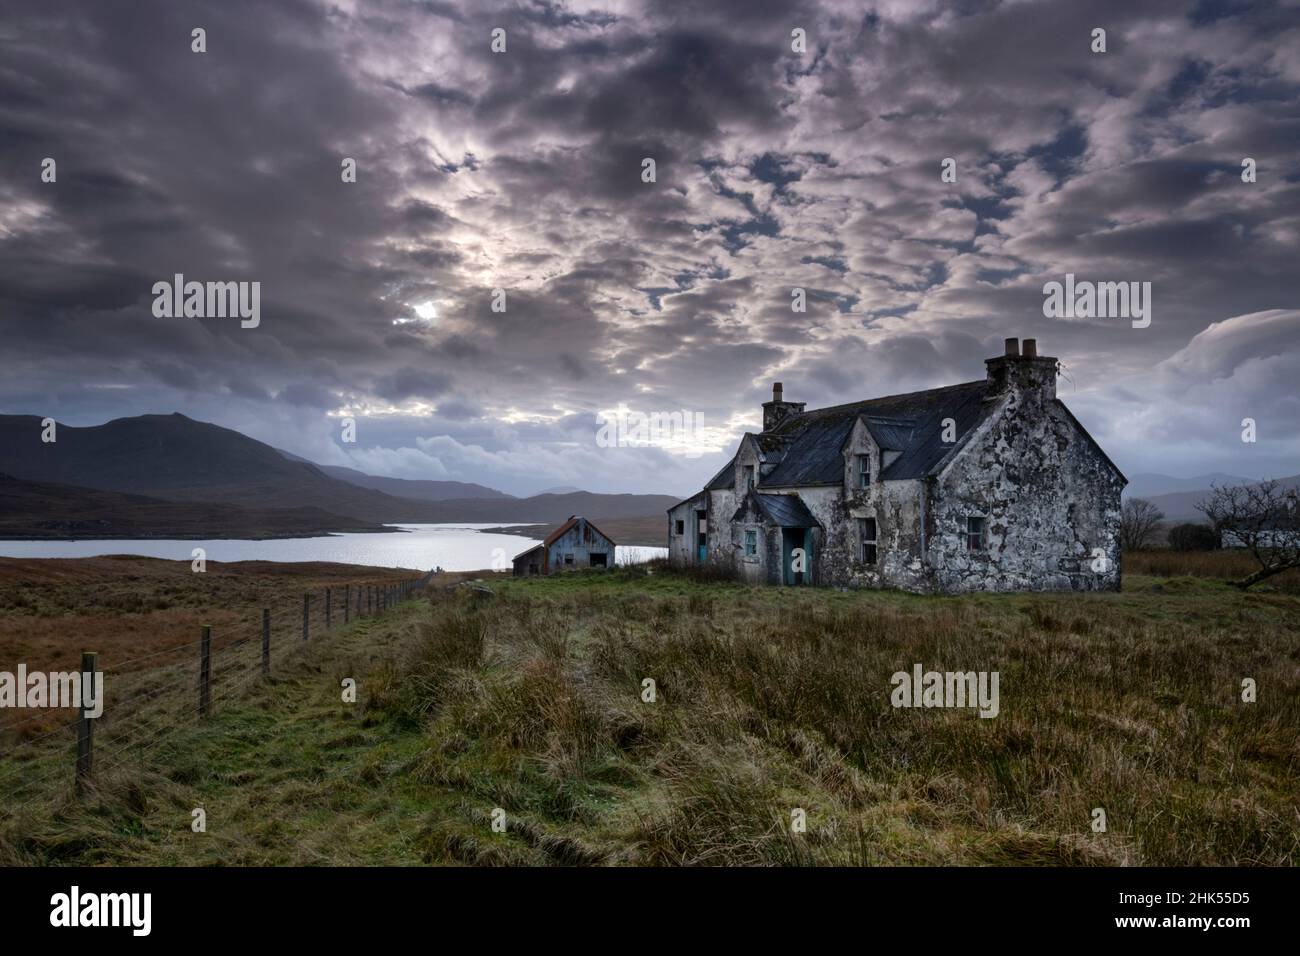 Abandoned Croft House overlooking Loch Siophort and the Harris Hills, Arivruaich, Isle of Lewis, Outer Hebrides, Scotland, United Kingdom, Europe Stock Photo